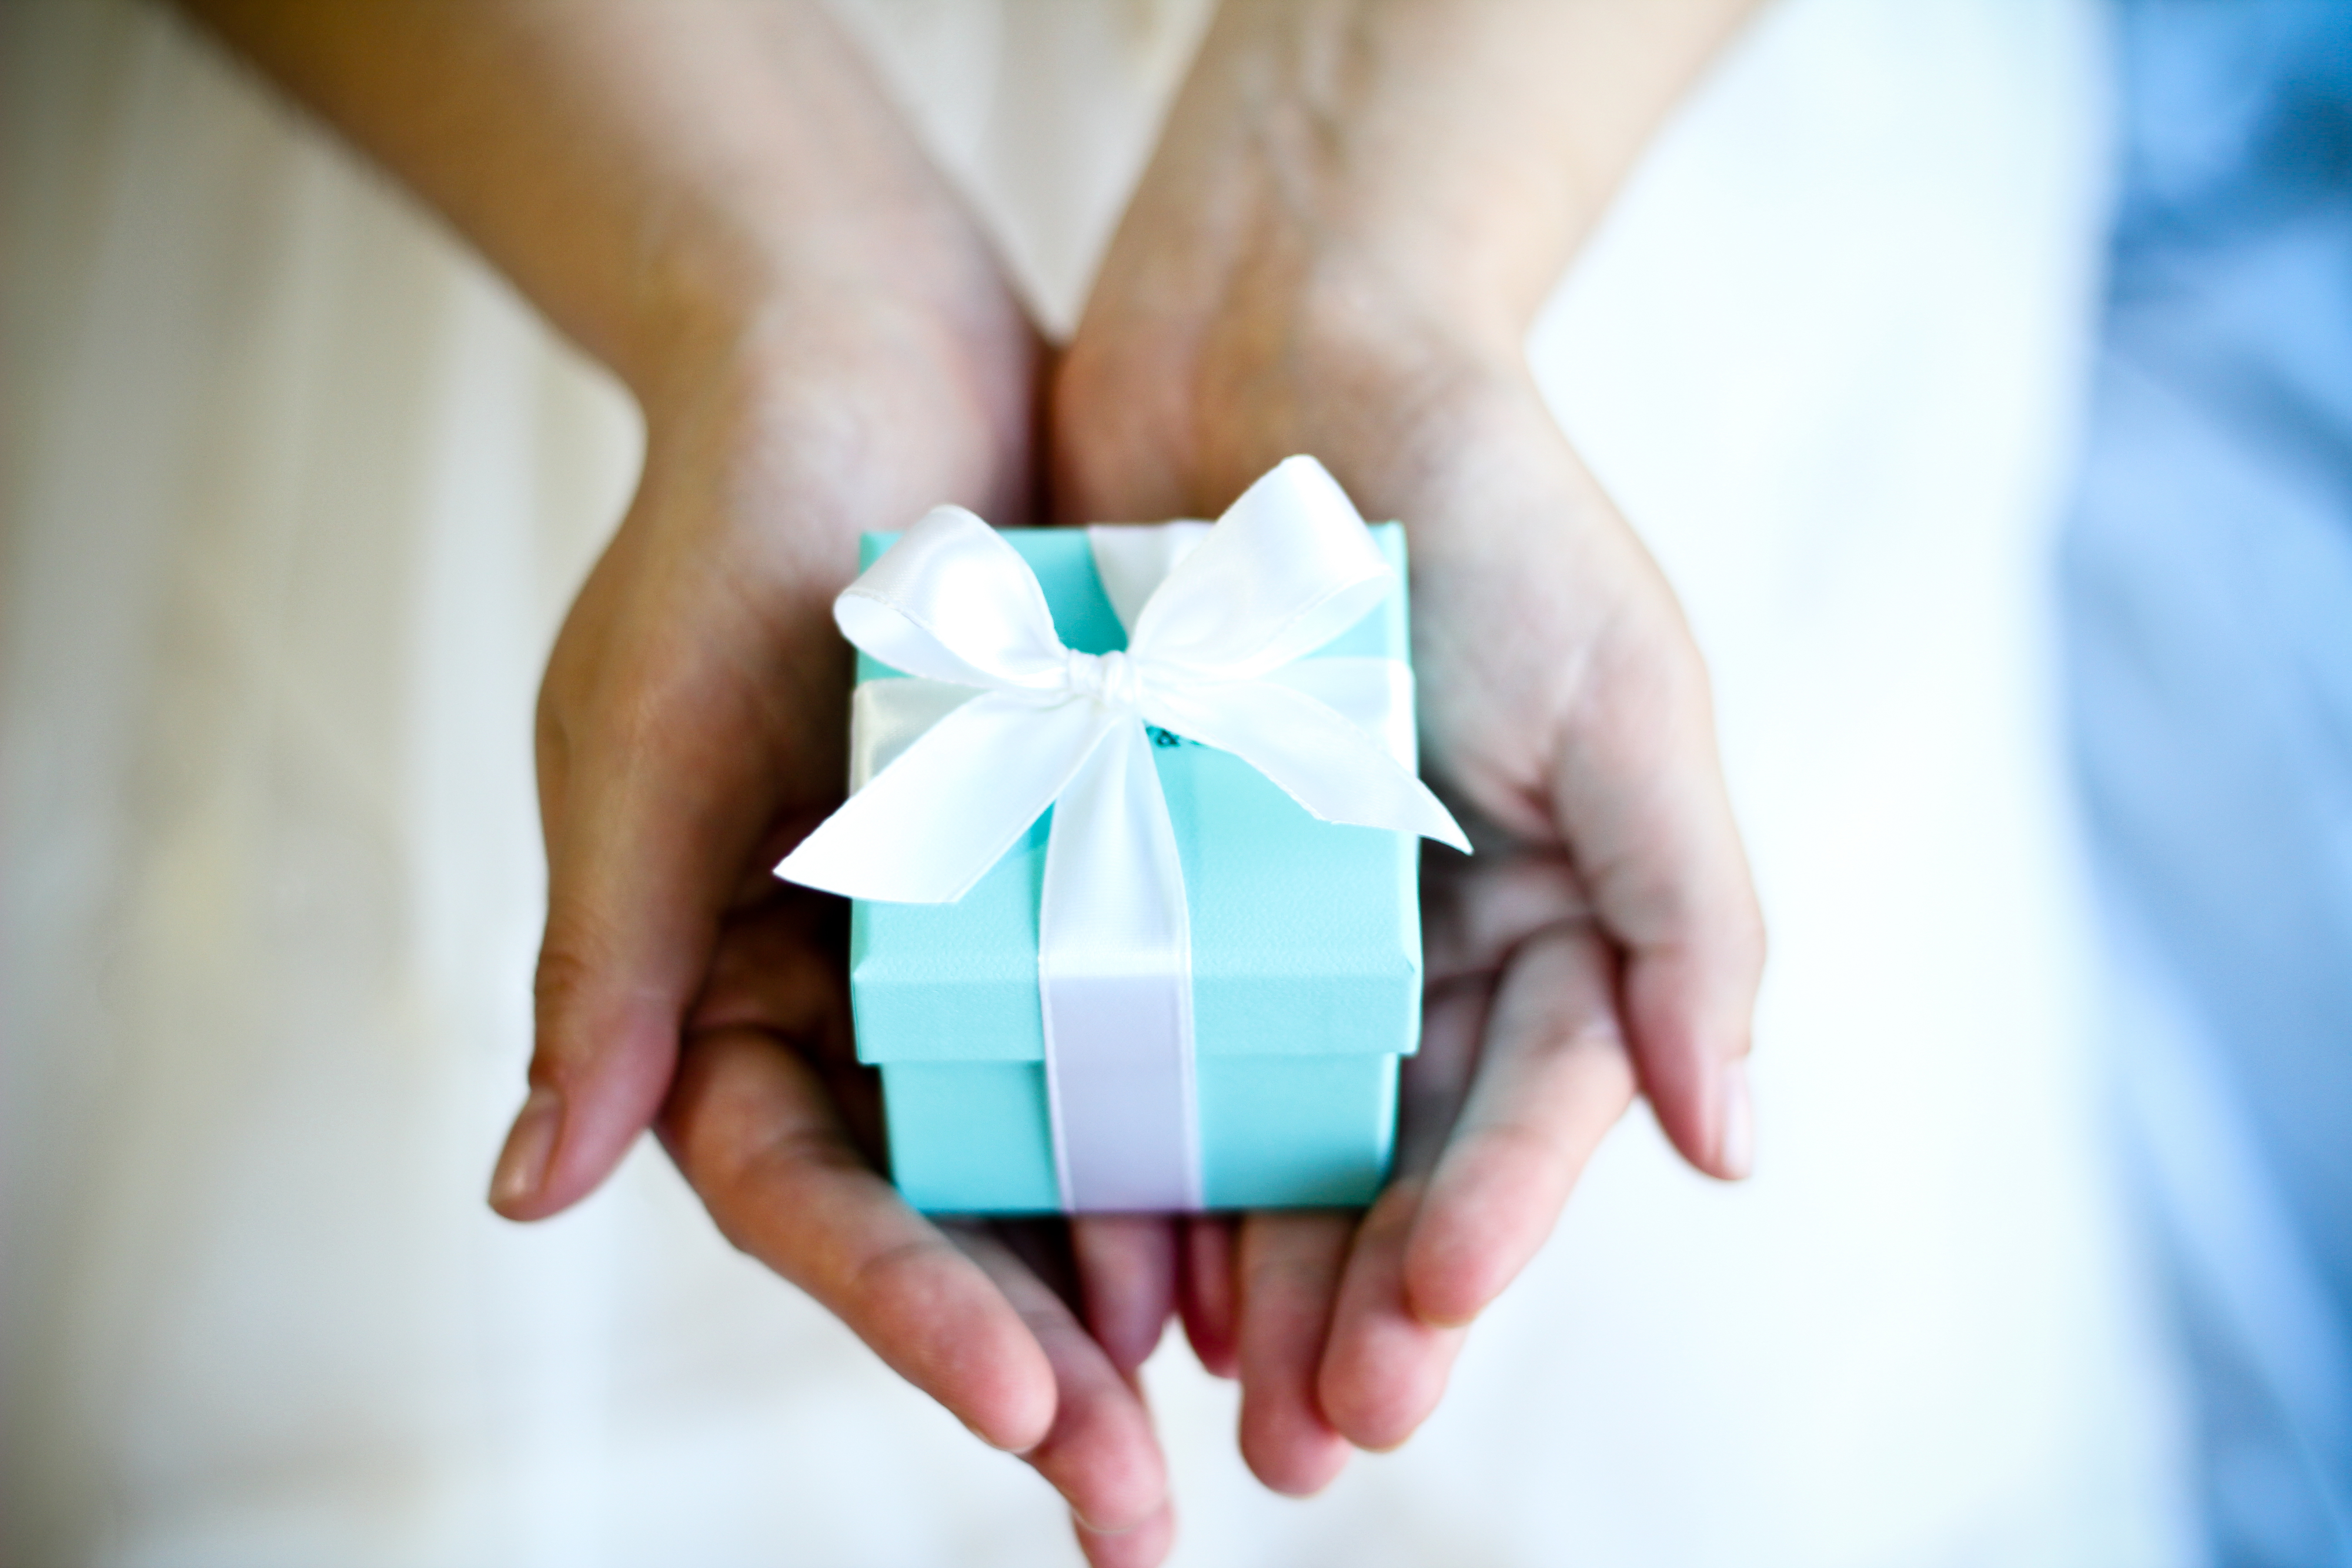 Person holds a small gift box with a bow, symbolizing a token of affection or a romantic gift